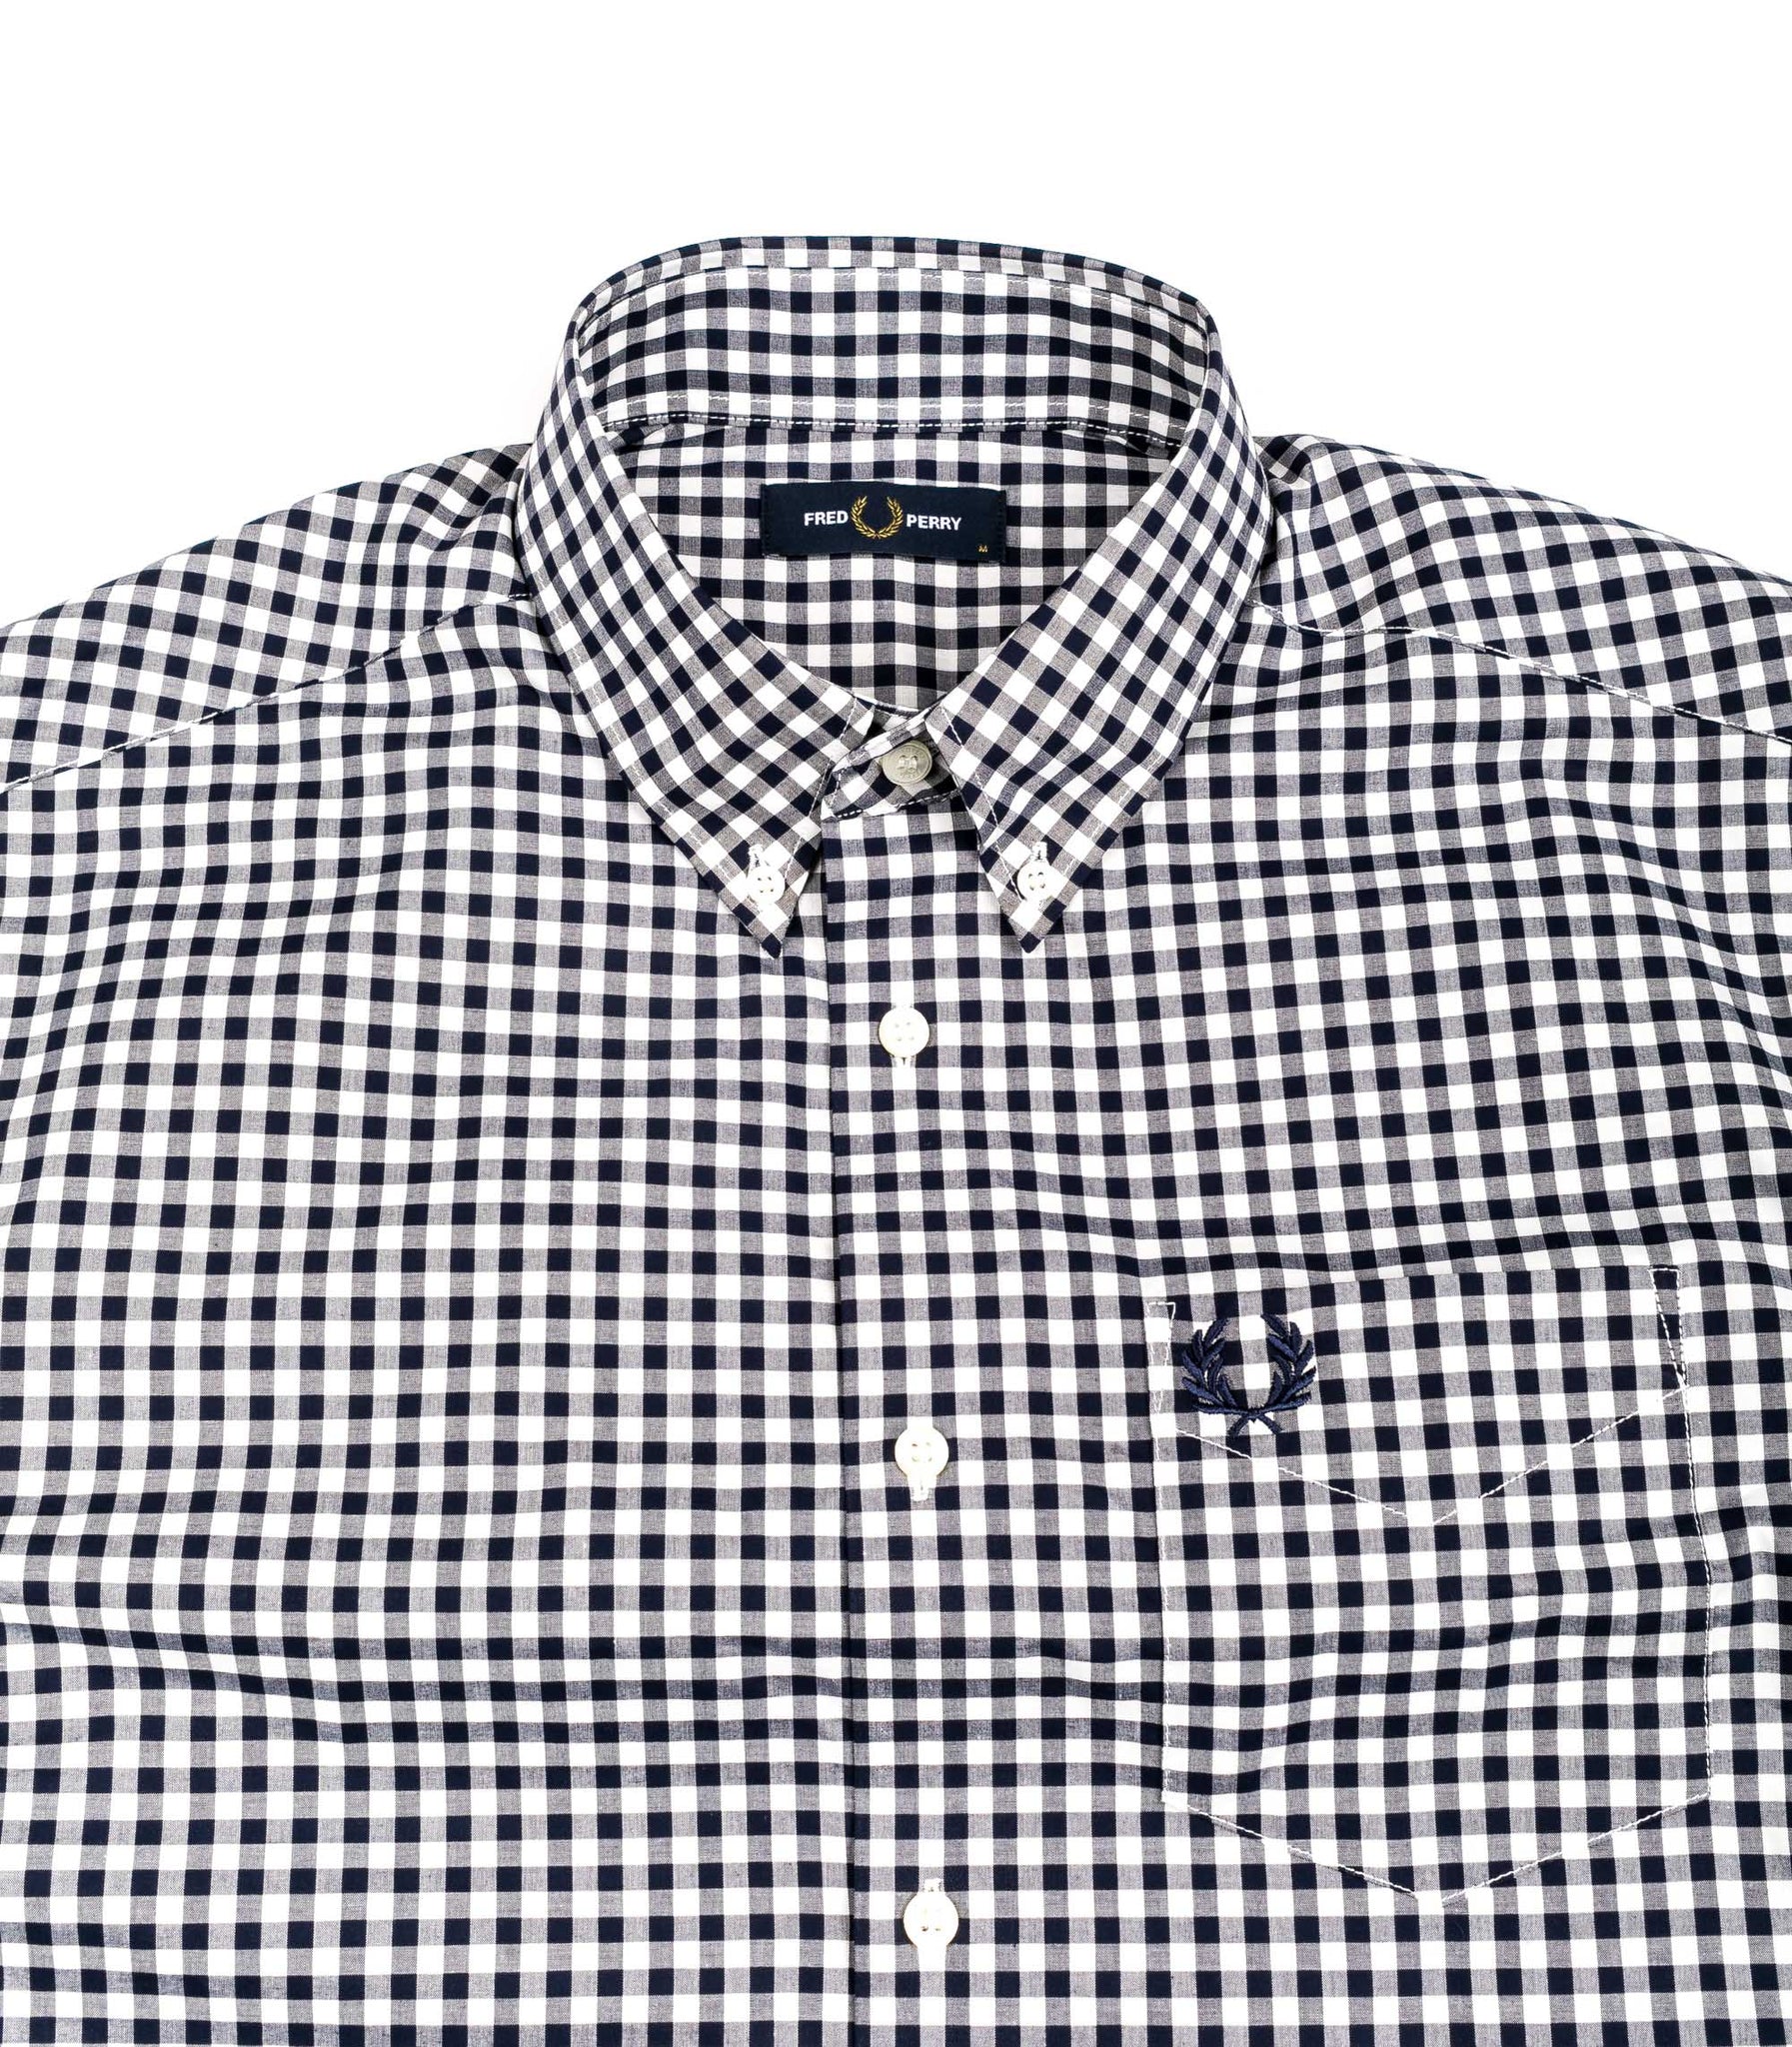 Fred Perry Men's Gingham Cotton Short Sleeve Shirt With Pocket